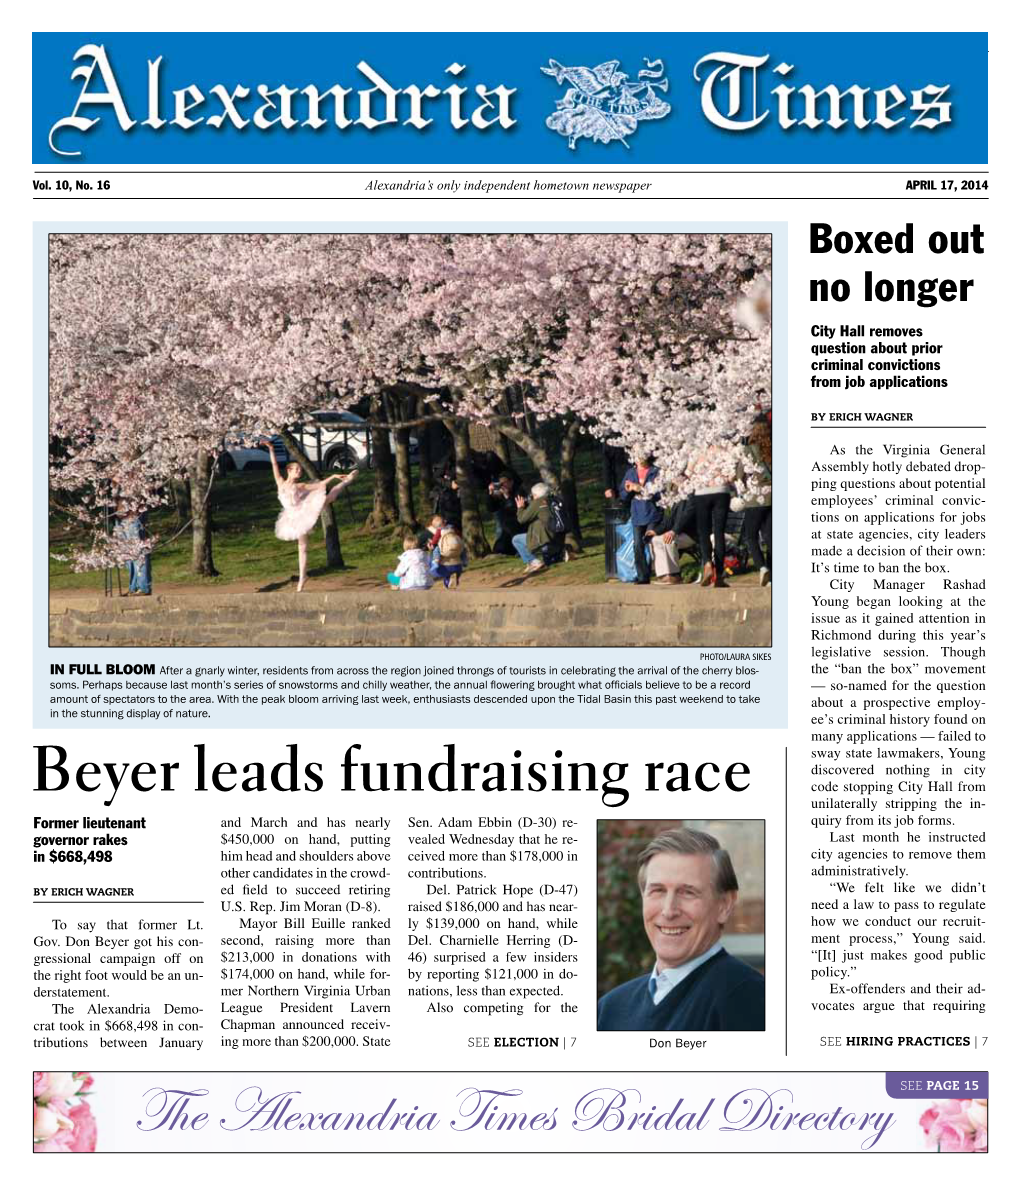 Beyer Leads Fundraising Race Code Stopping City Hall from Unilaterally Stripping the In- Former Lieutenant and March and Has Nearly Sen